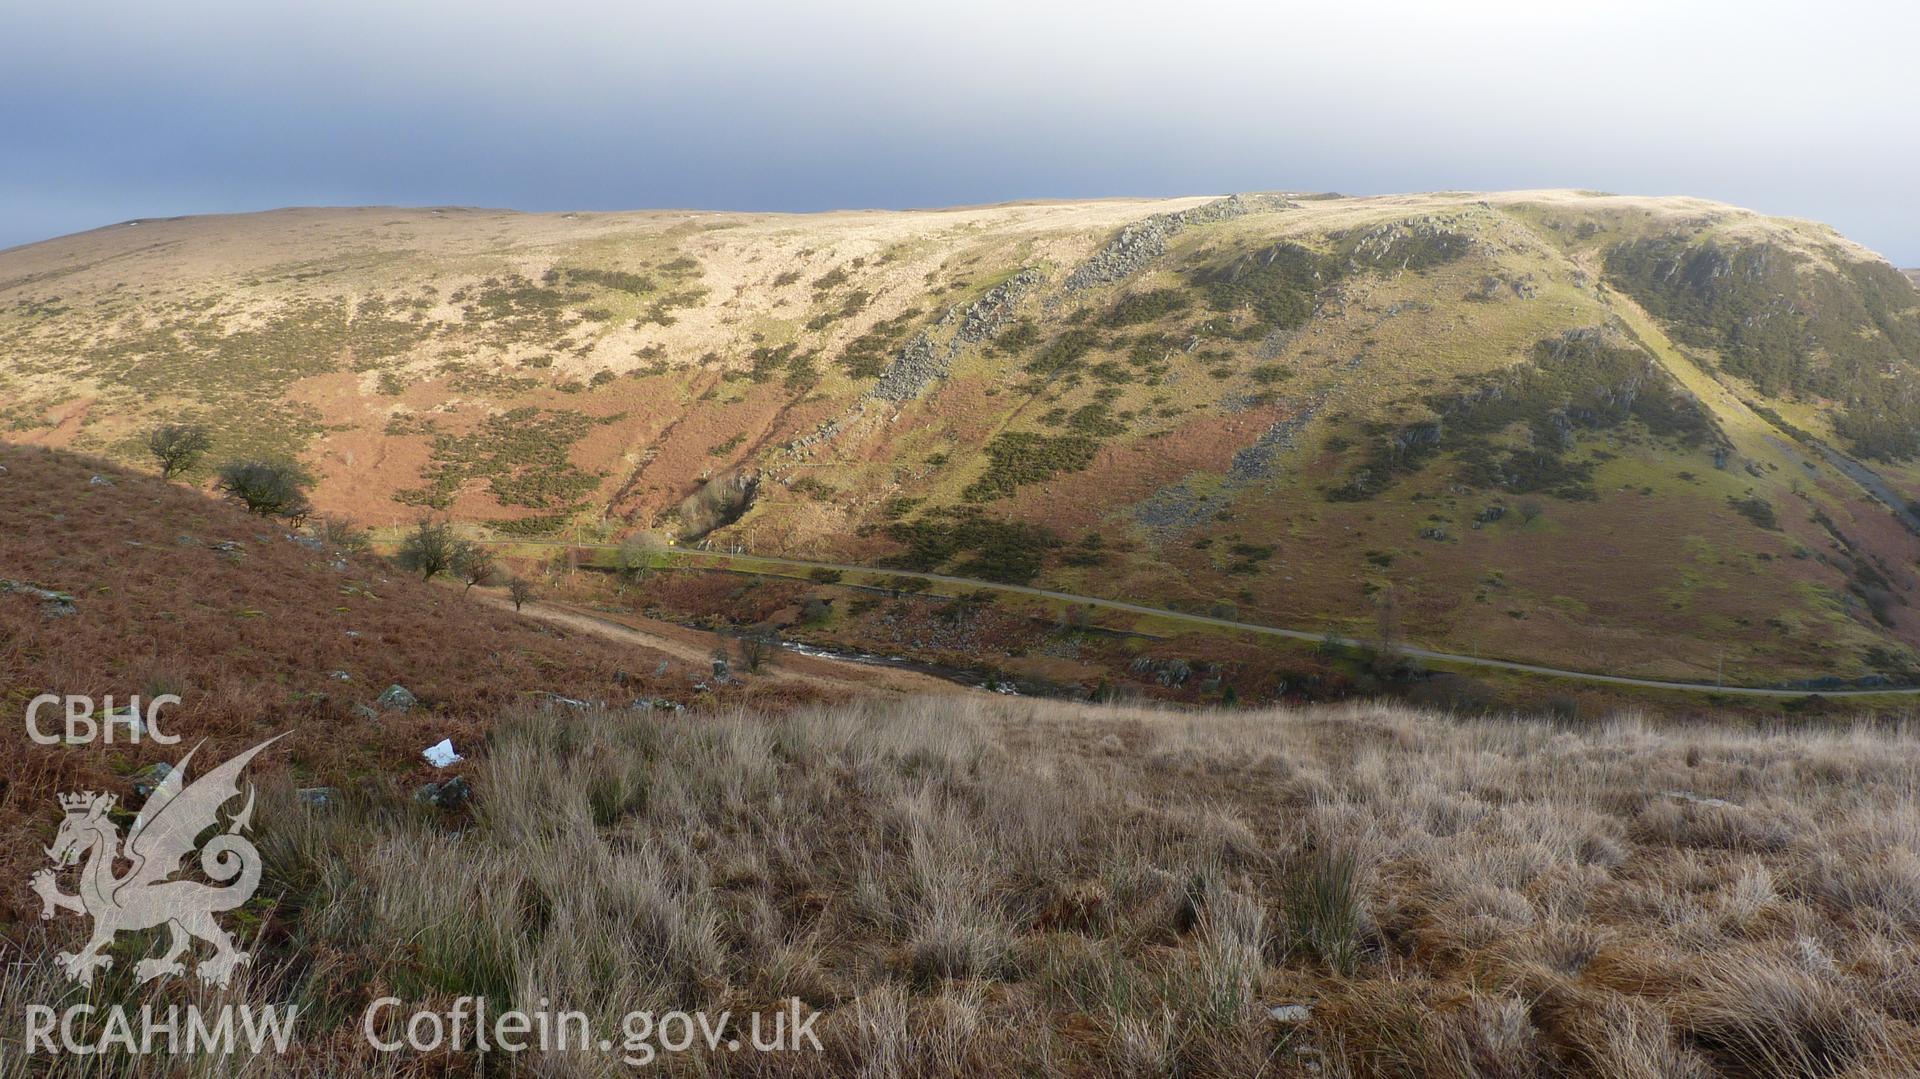 View from Cerrig Llwydion deserted rural settlement, looking north east towards penstock route. Photographed for Archaeological Desk Based Assessment of Afon Claerwen, Elan Valley, Rhayader. Assessment by Archaeology Wales in 2017-18. Project no. 2573.